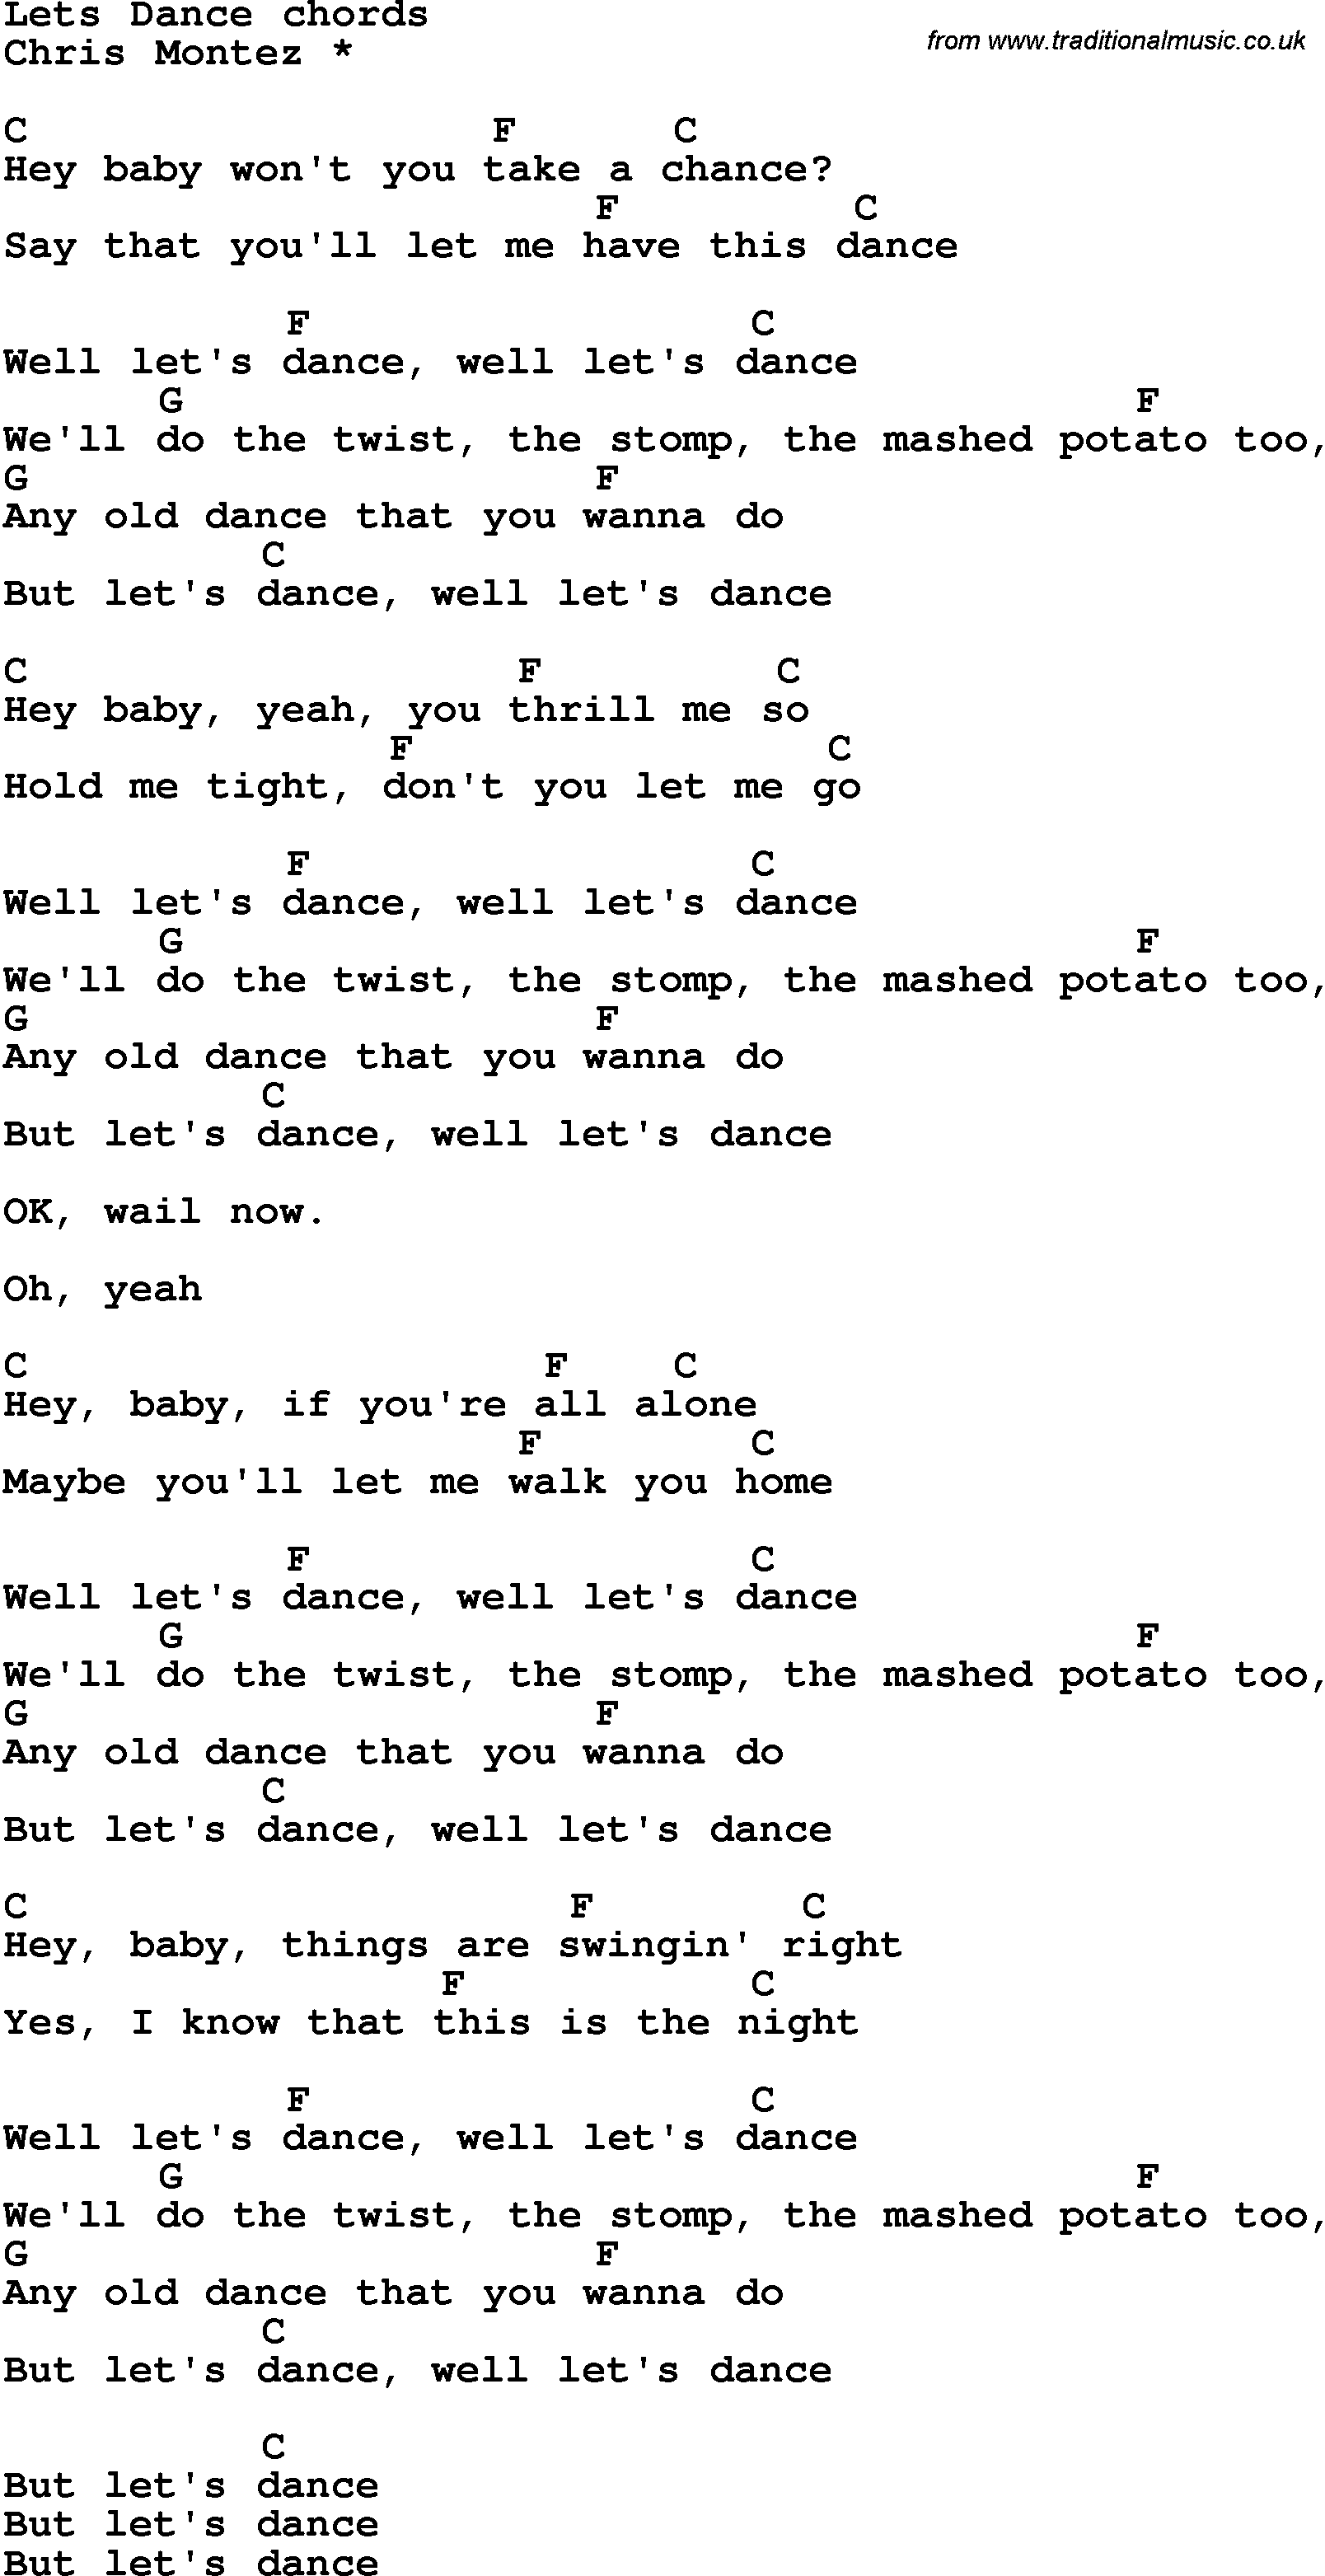 Song Lyrics with guitar chords for Let's Dance